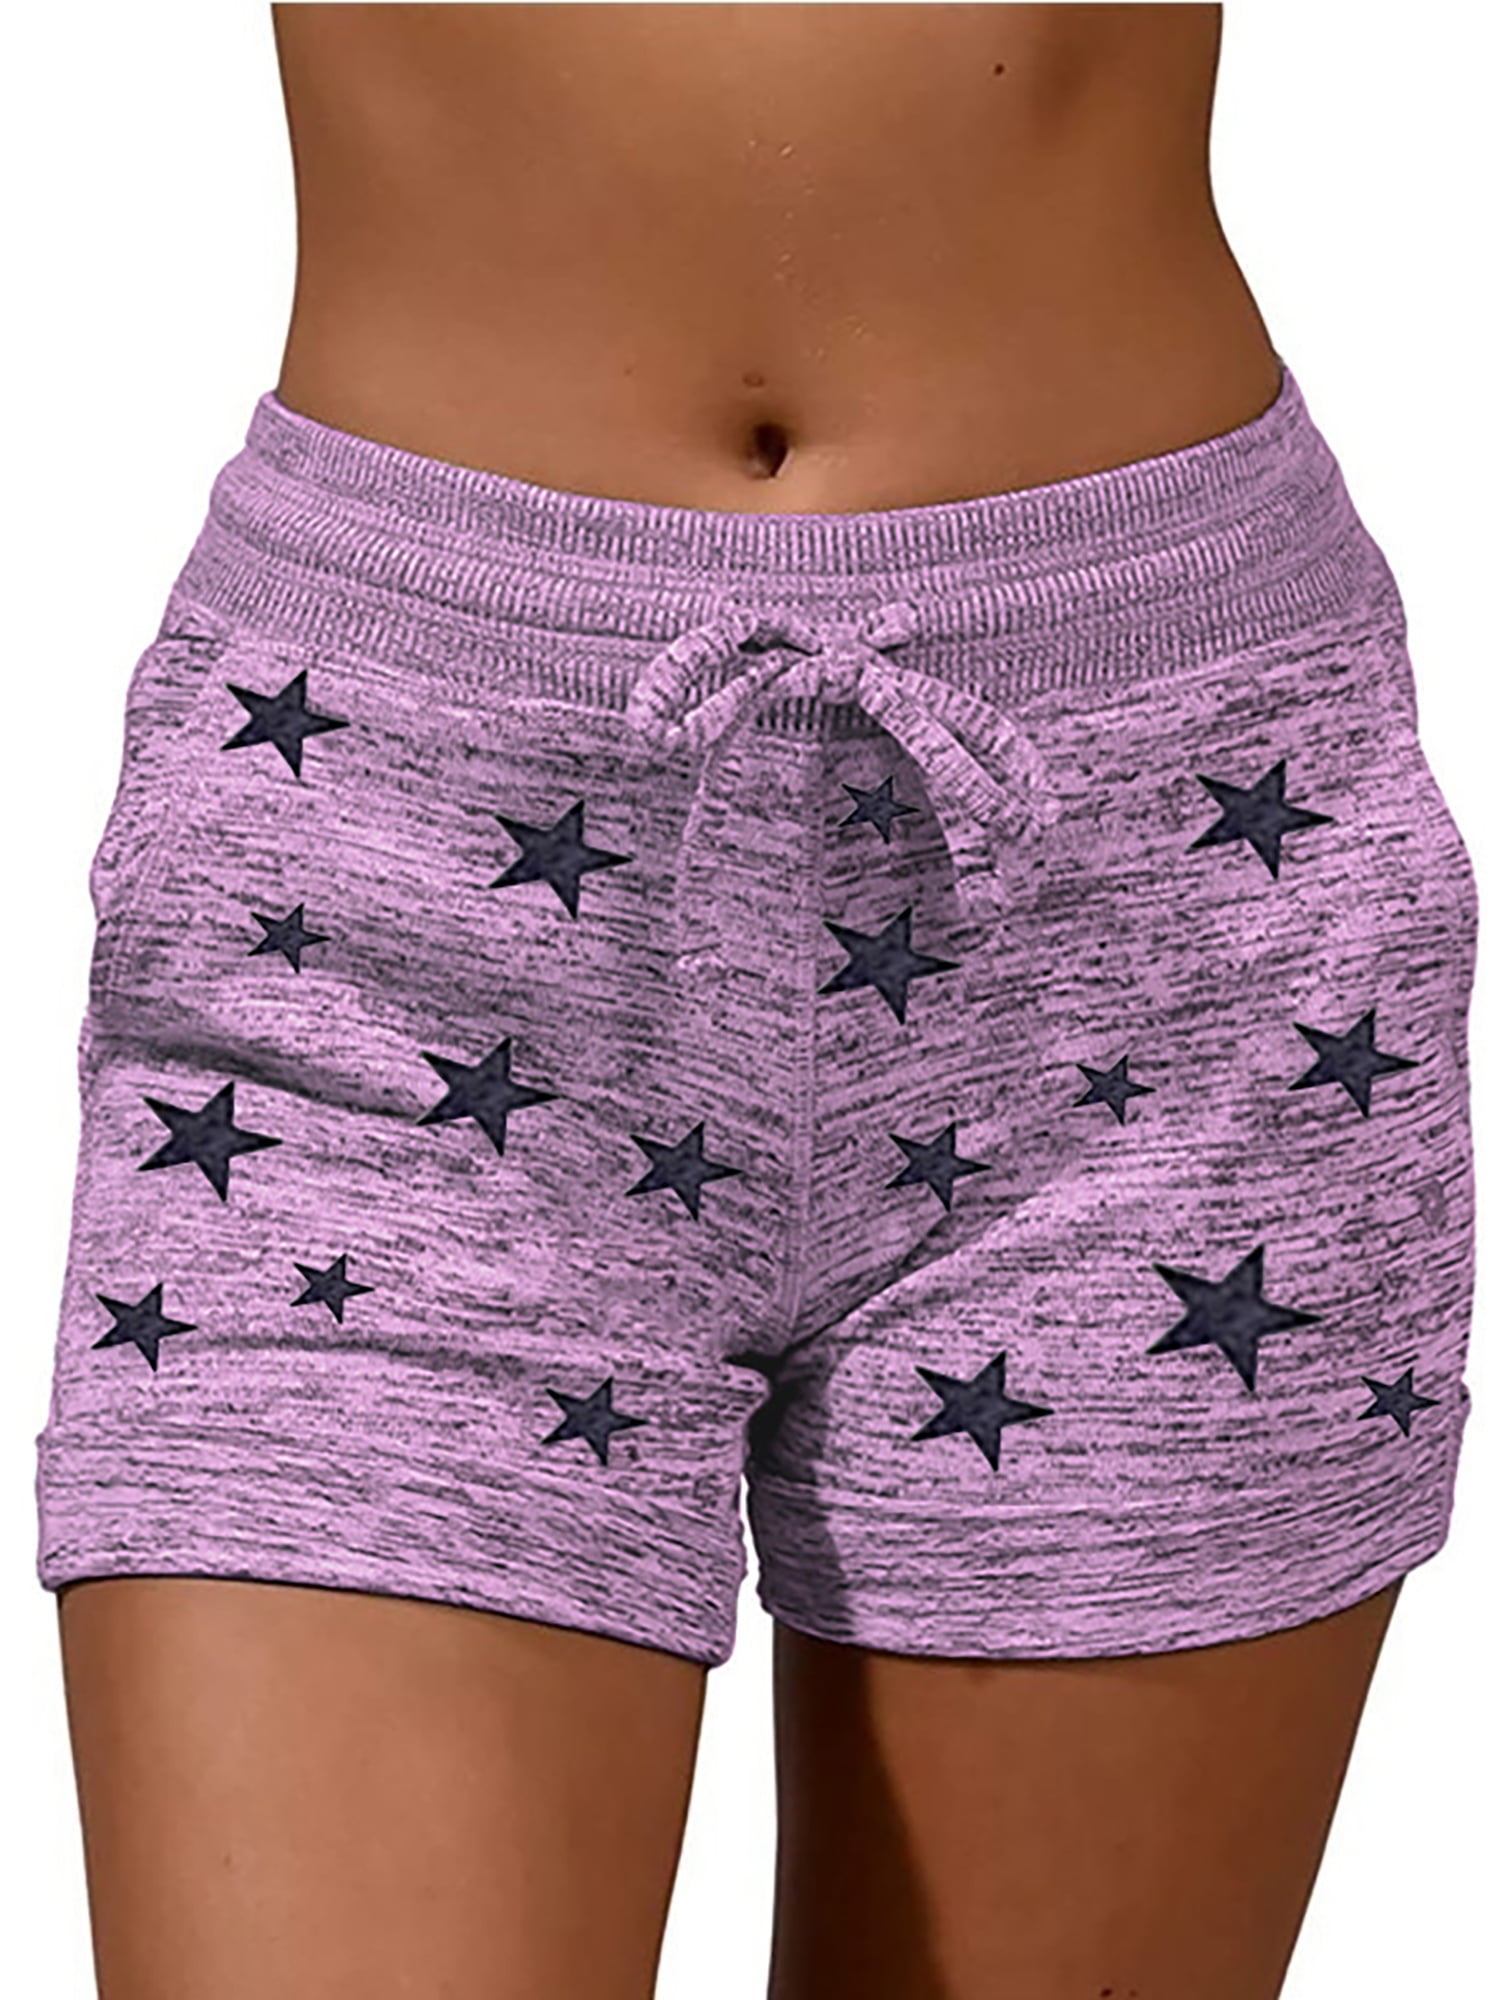 Womens Shorts for Athletic Yoga Running Workout Fitness GYM Lounge Short Pants